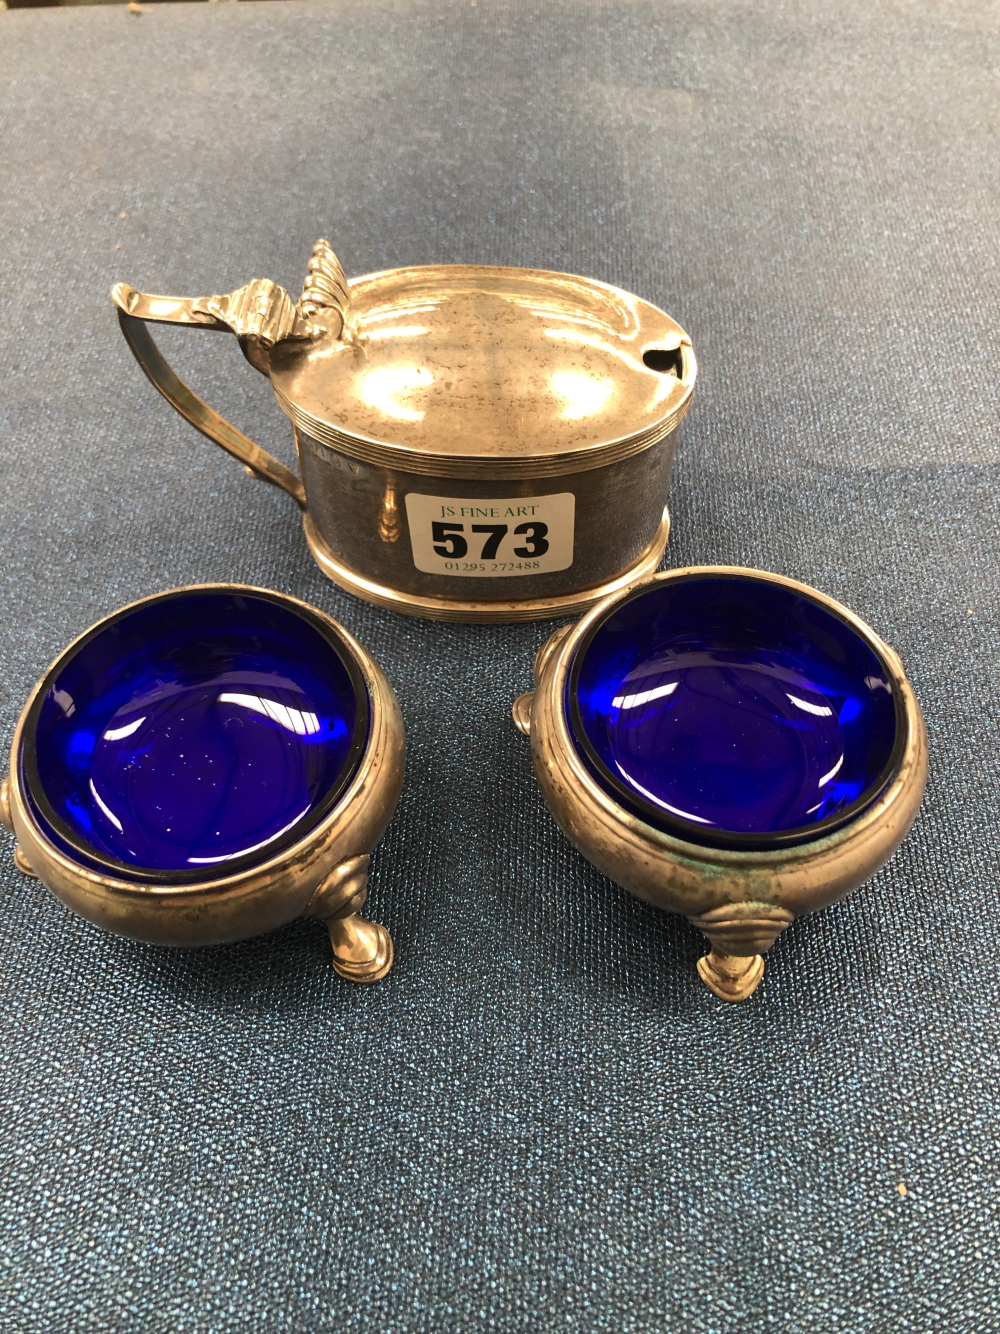 AN EDINBURGH SILVER OVAL DRUM MUSTARD, 1894 TOGETHER WITH A PAIR OF GEORGE III SILVER TRIPOD TUB